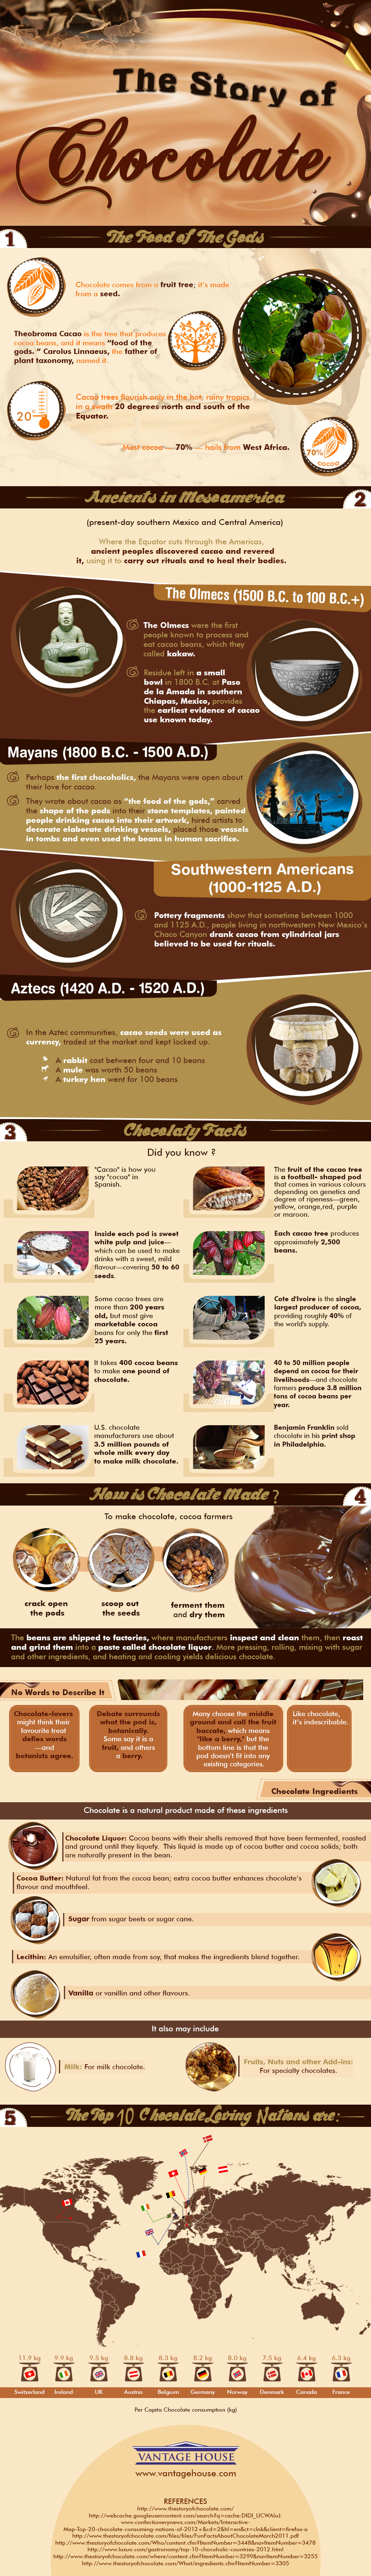 The Story of Chocolate Infographic